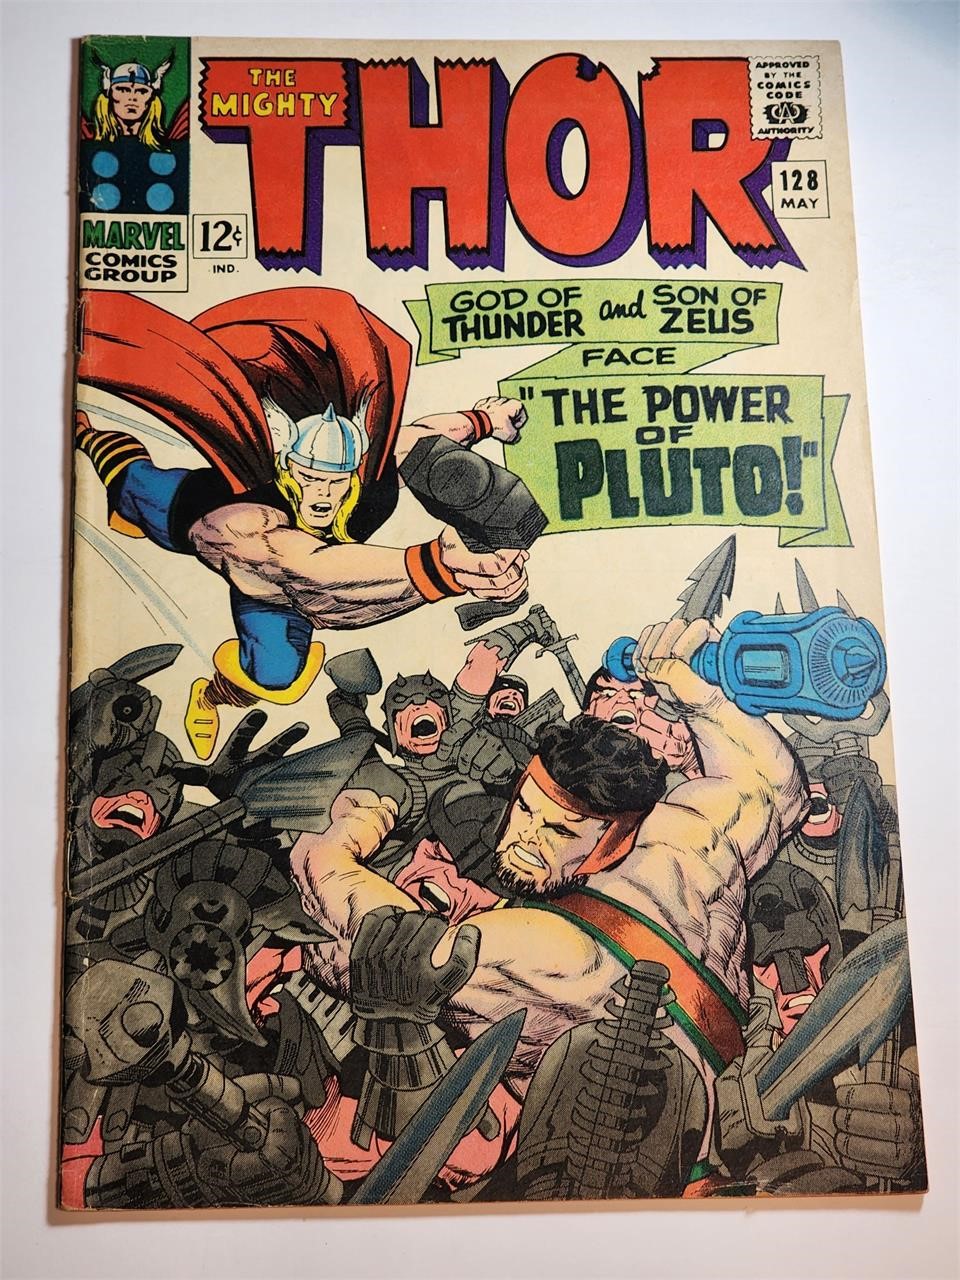 AND SOLD IT THUNDERING COMIC AUCTION PART 2 #190